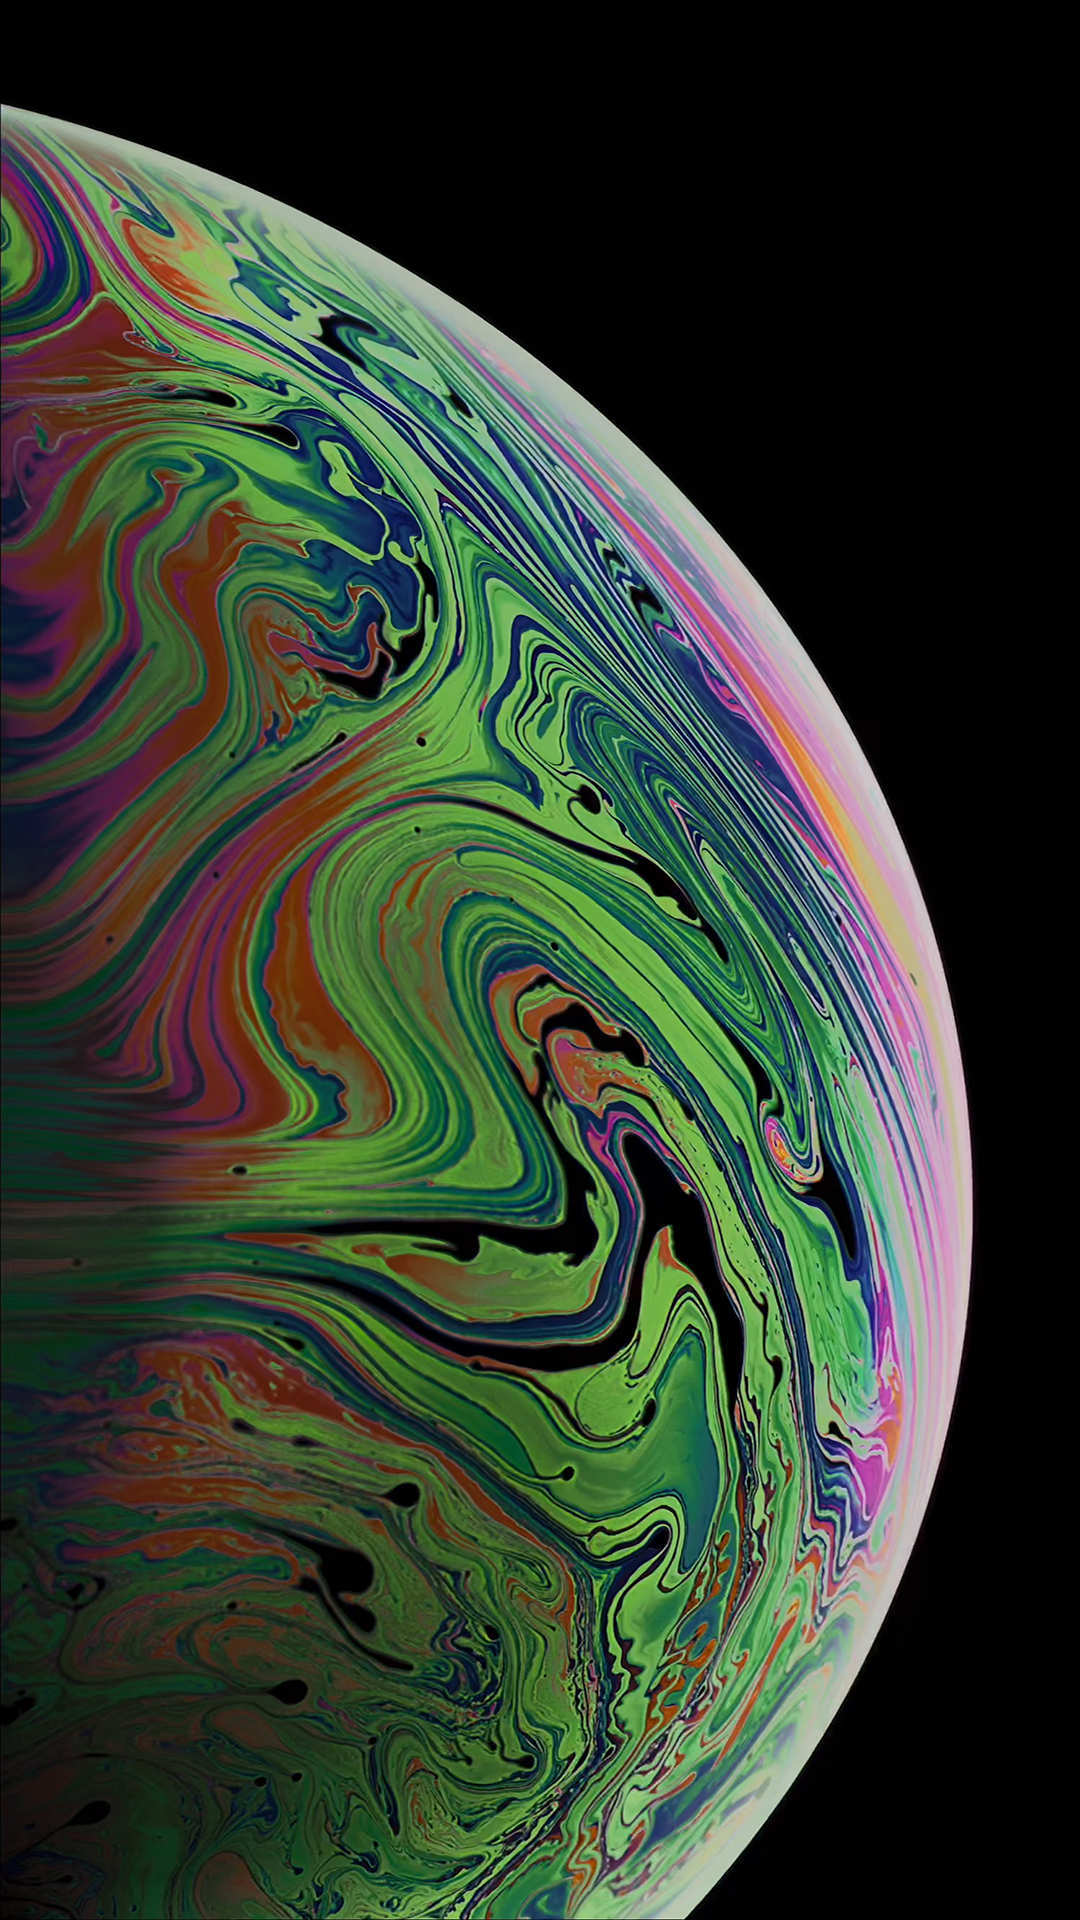 iPhone XS Max Wallpaper - Black - Wallpapers Central